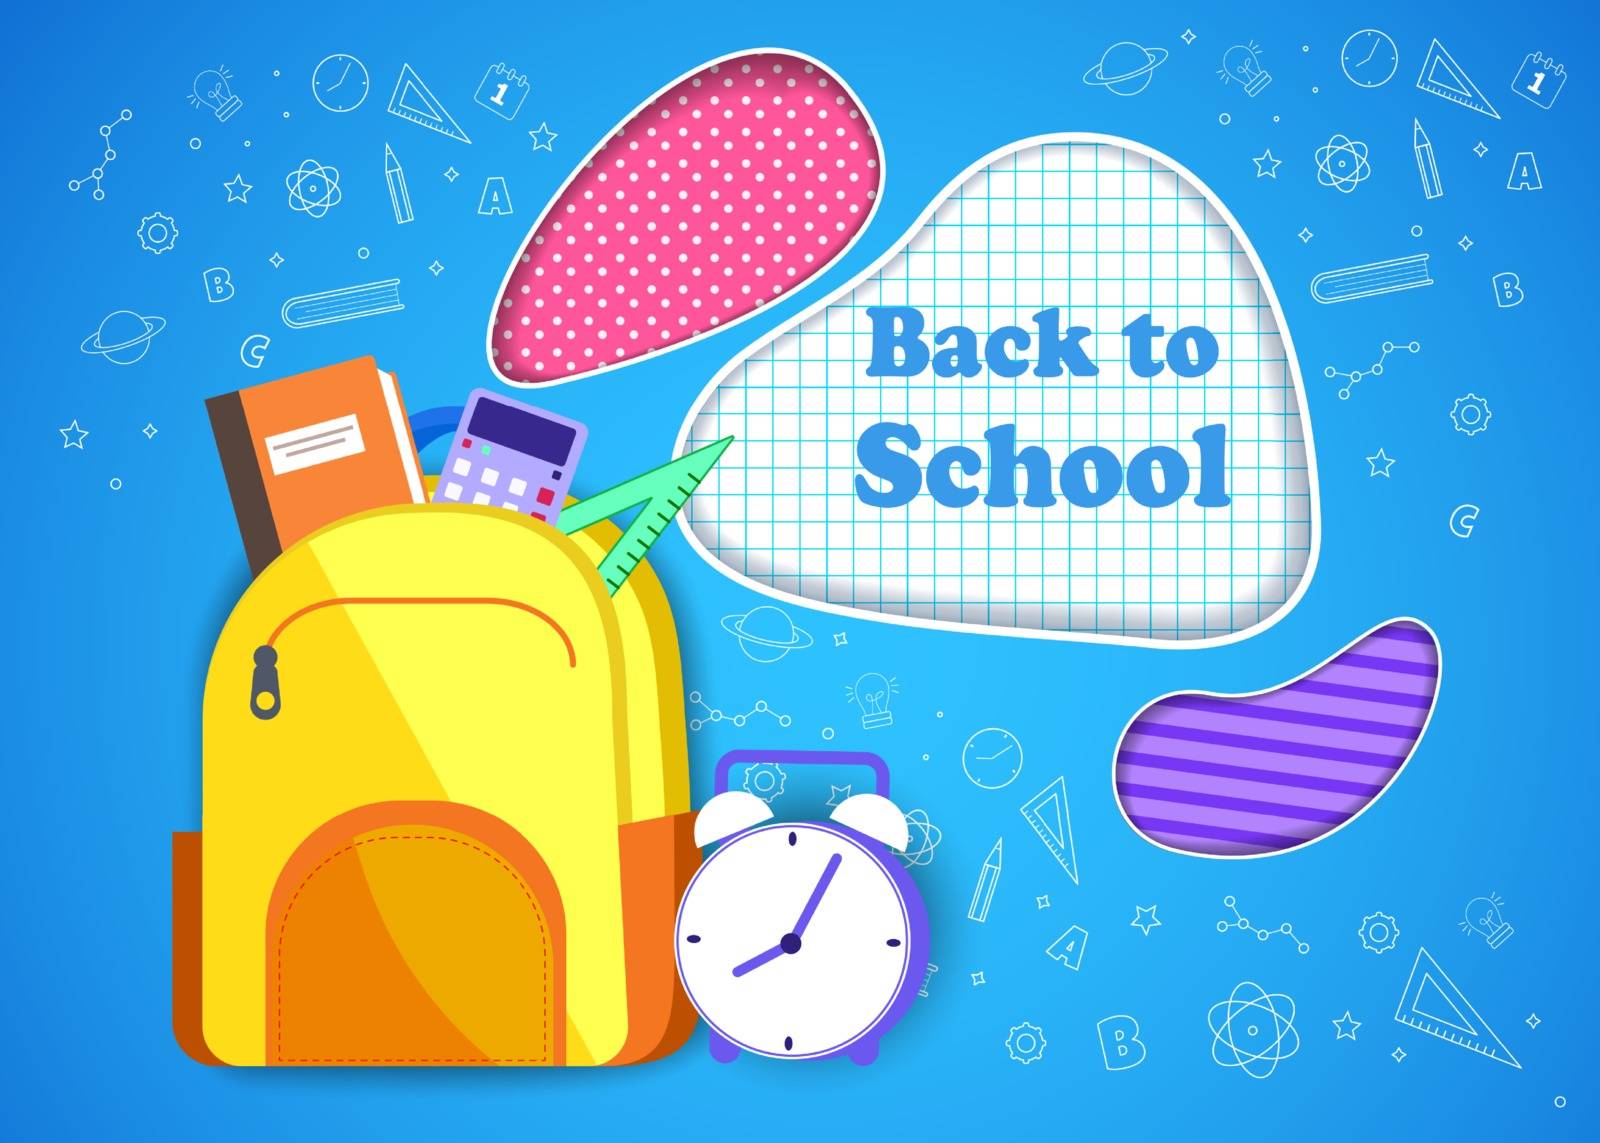 Colorful back to school templates for invitation, poster, banner, promotion,sale etc. School supplies cartoon illustration. Vector back to school design templates.